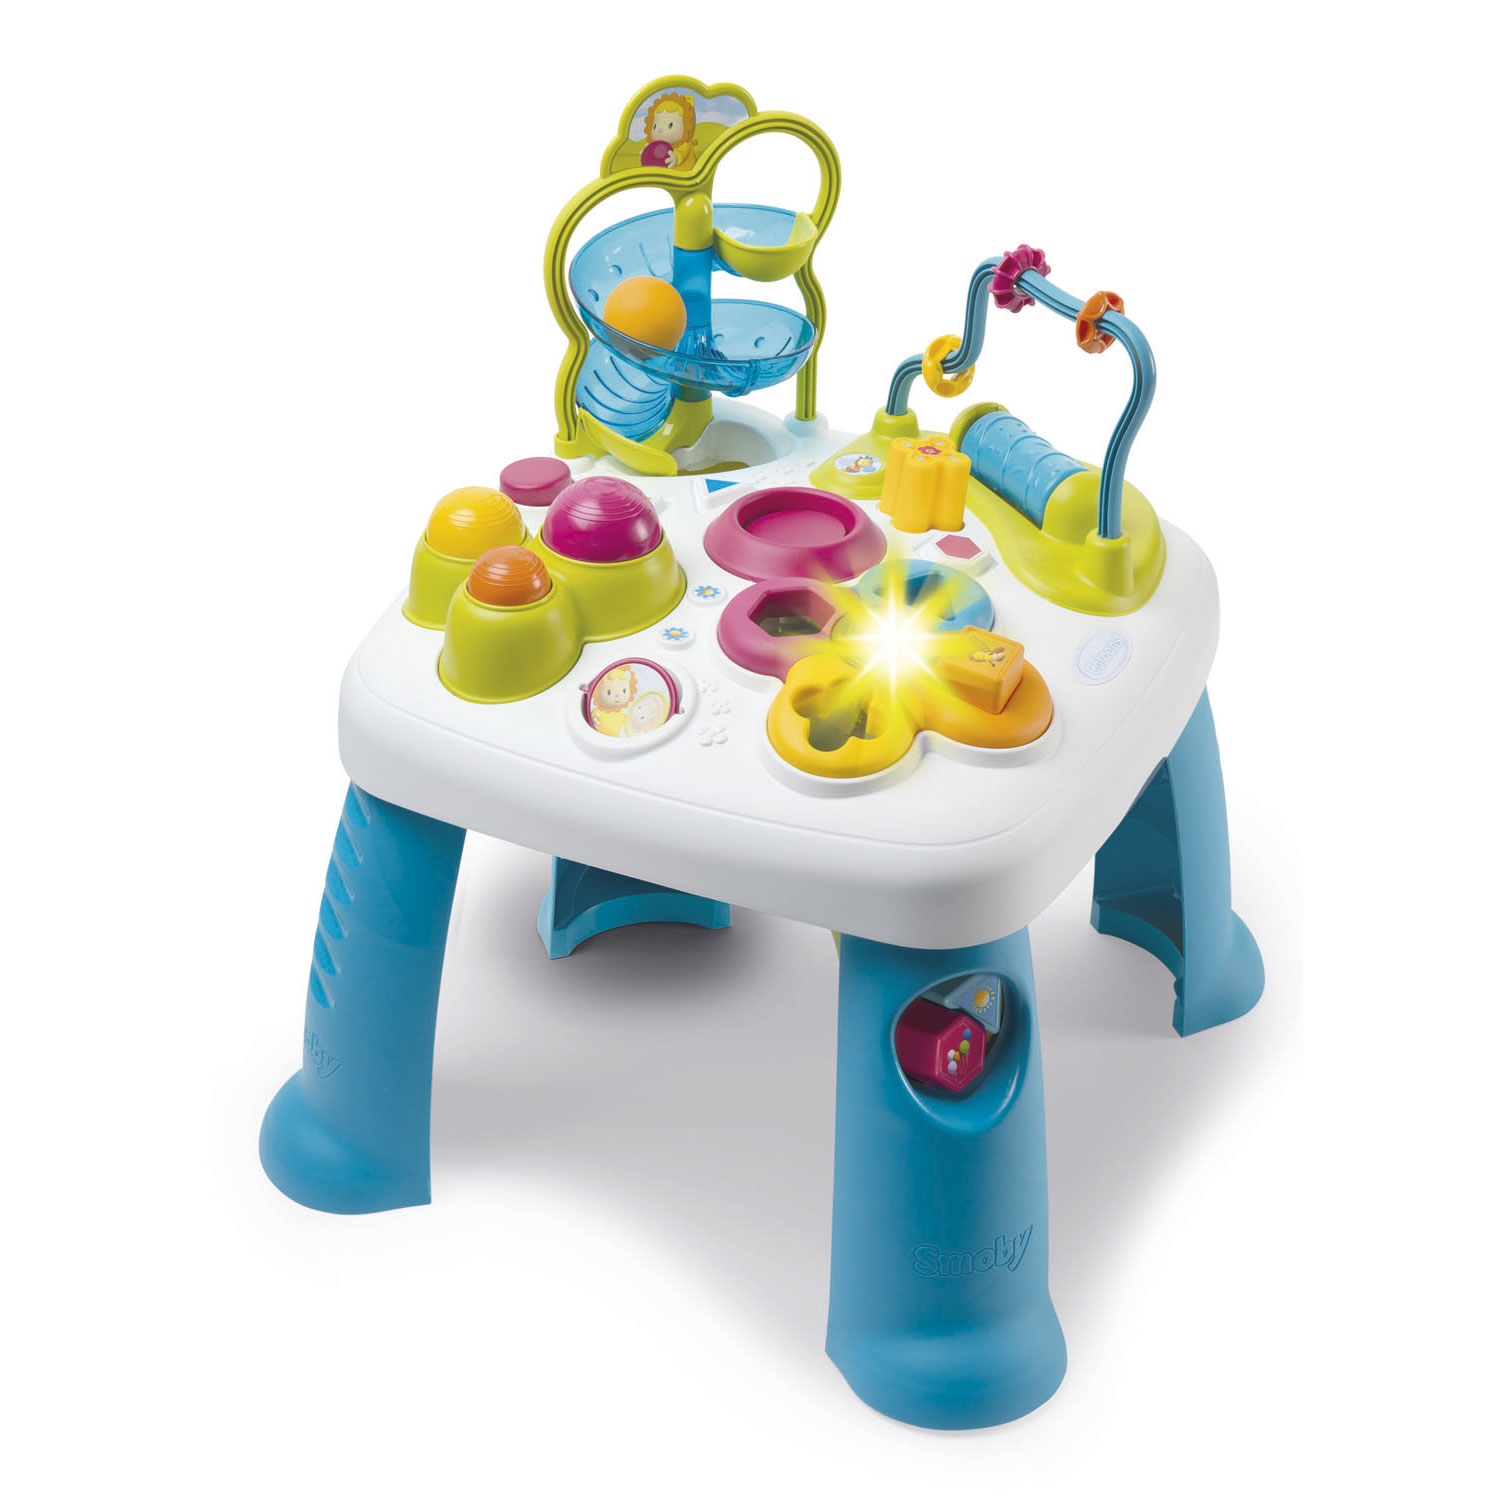 Little Smoby Activity Table - SMOBY - green